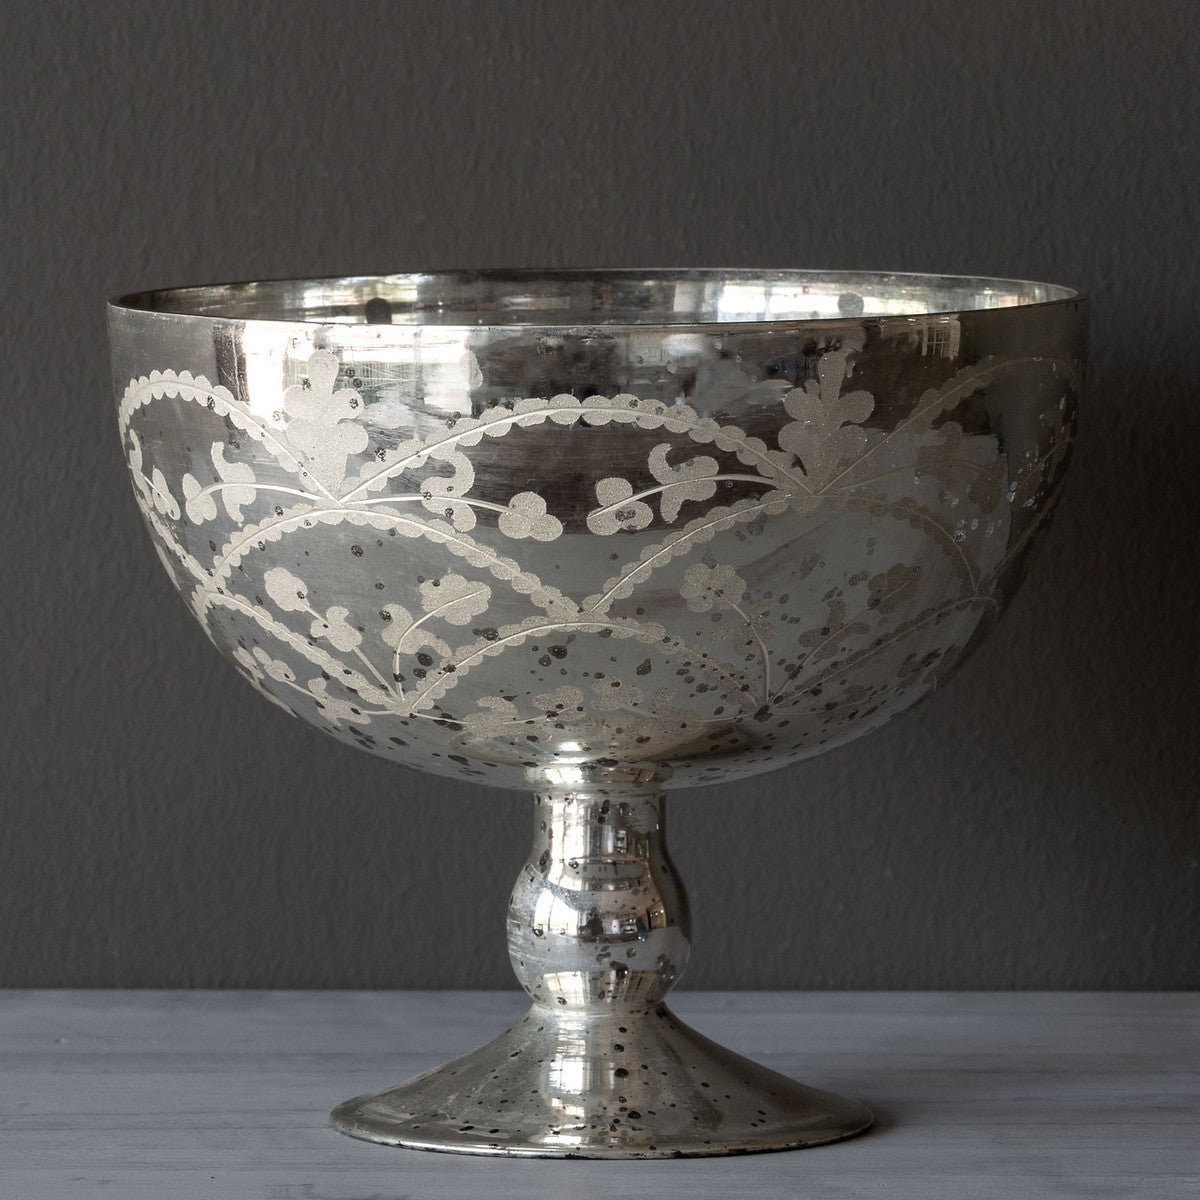 ETCHED MERCURY GLASS GERLAND COMPOTE